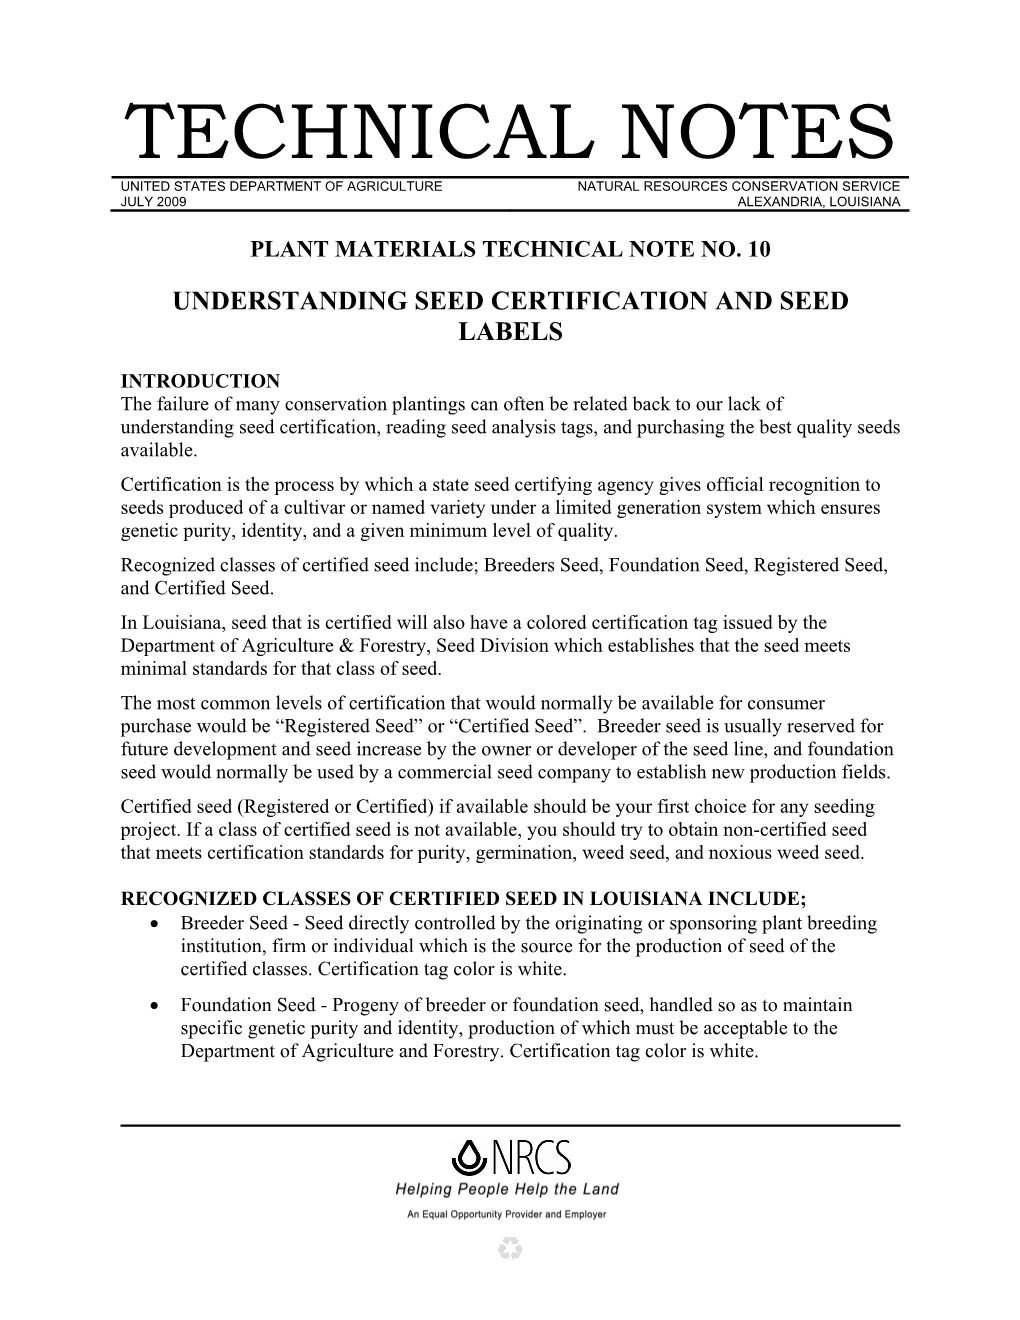 Understanding Seed Certification and Seed Labels